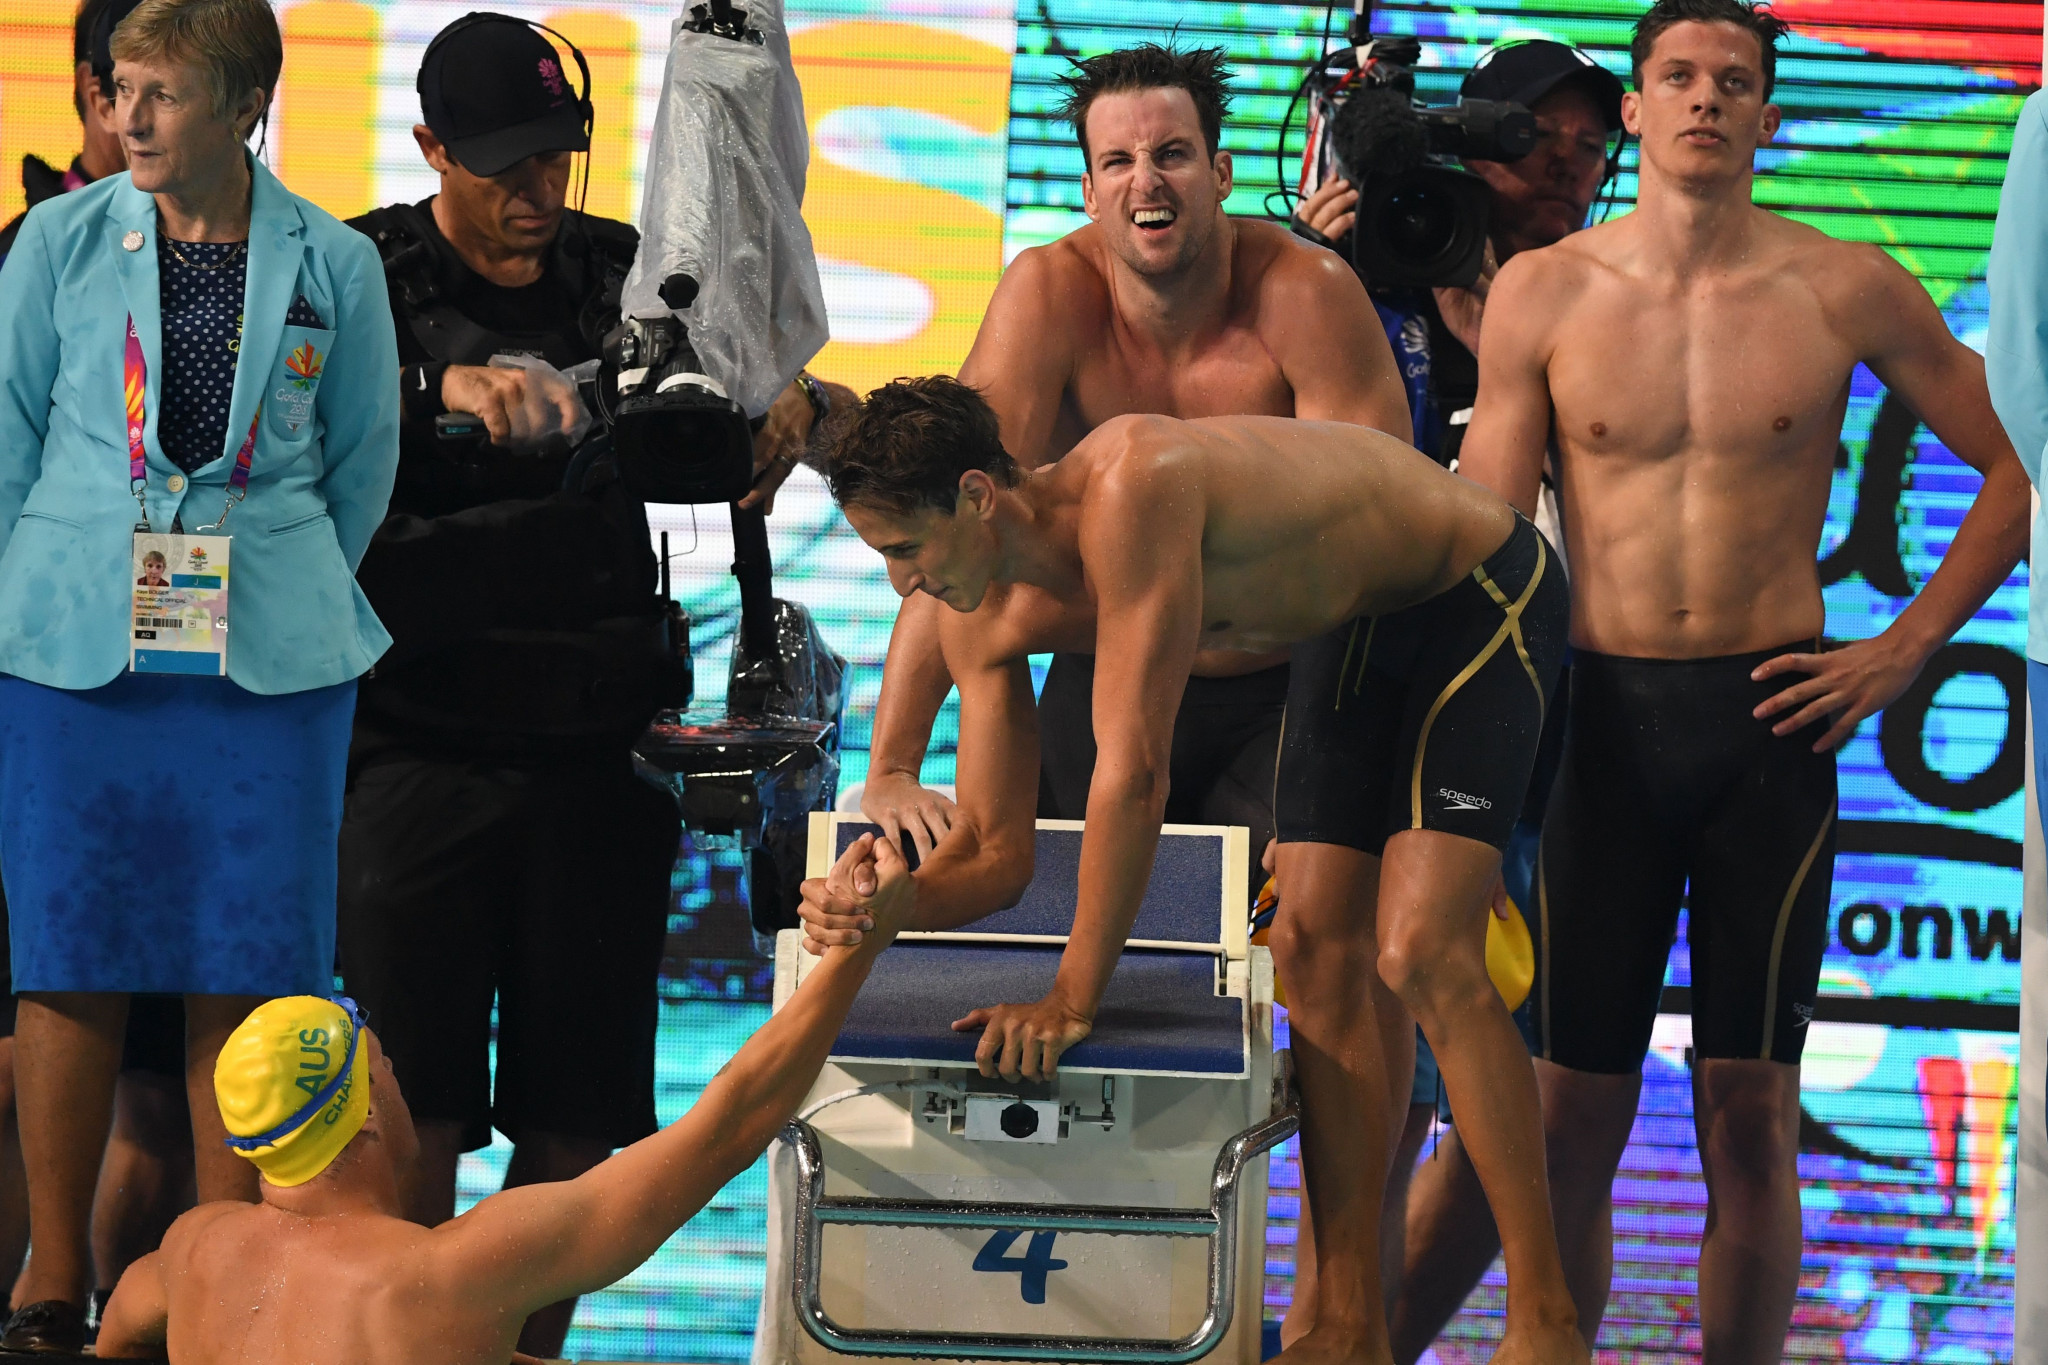 Hosts Australia won six swimming gold medals today, including one in the men's 4x100 metres freestyle, to move to the top of the standings for the Gold Coast 2018 Commonwealth Games ©Getty Images